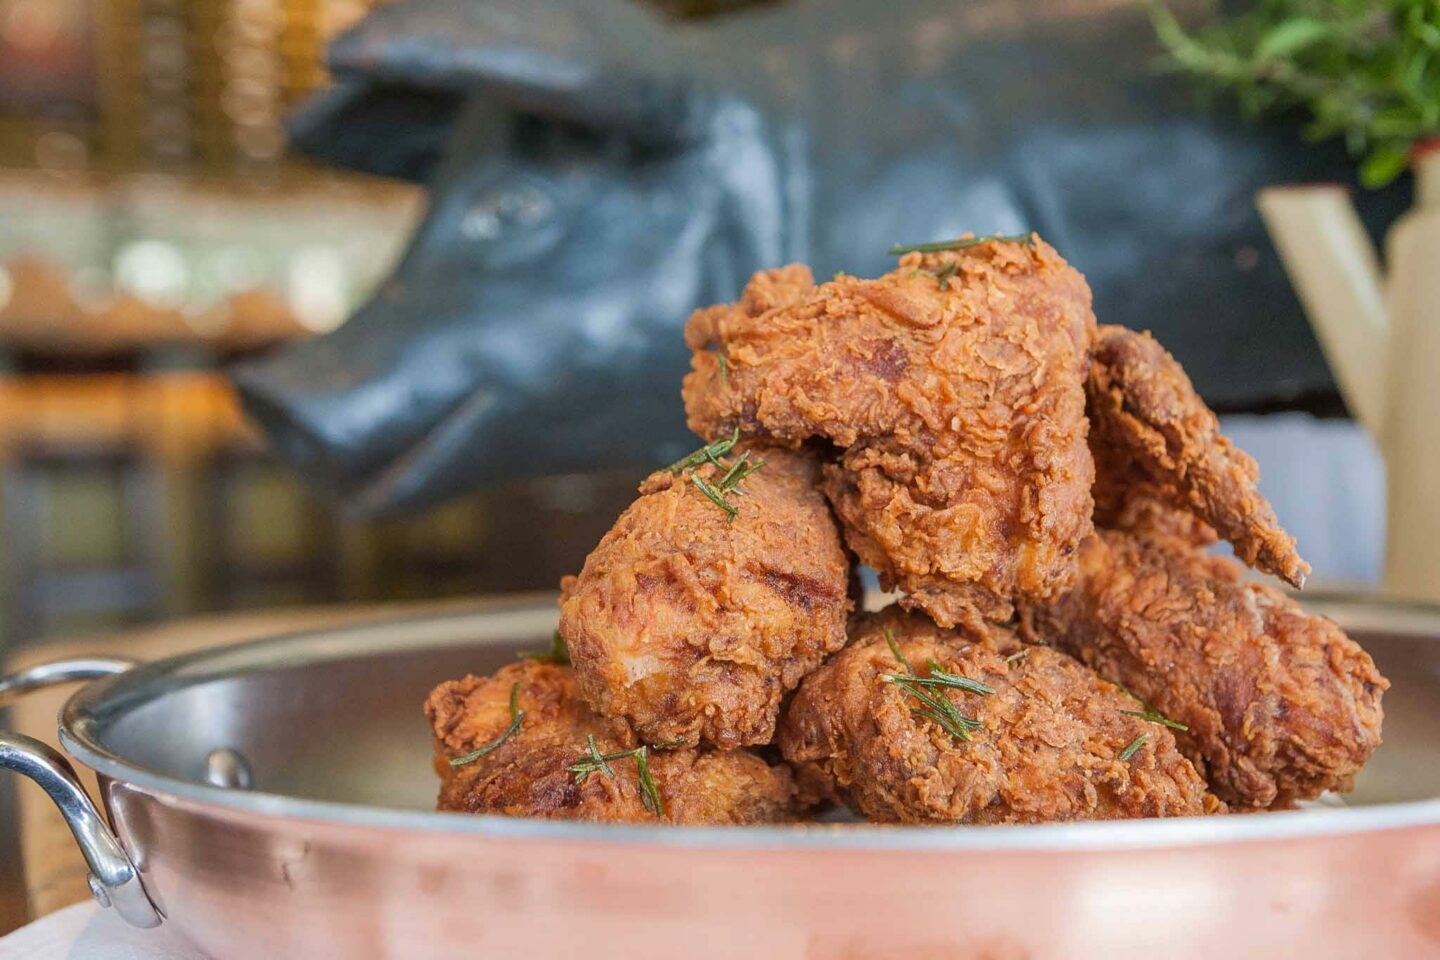 A bowl of fried chicken from Ad Hoc in Yountville, CA